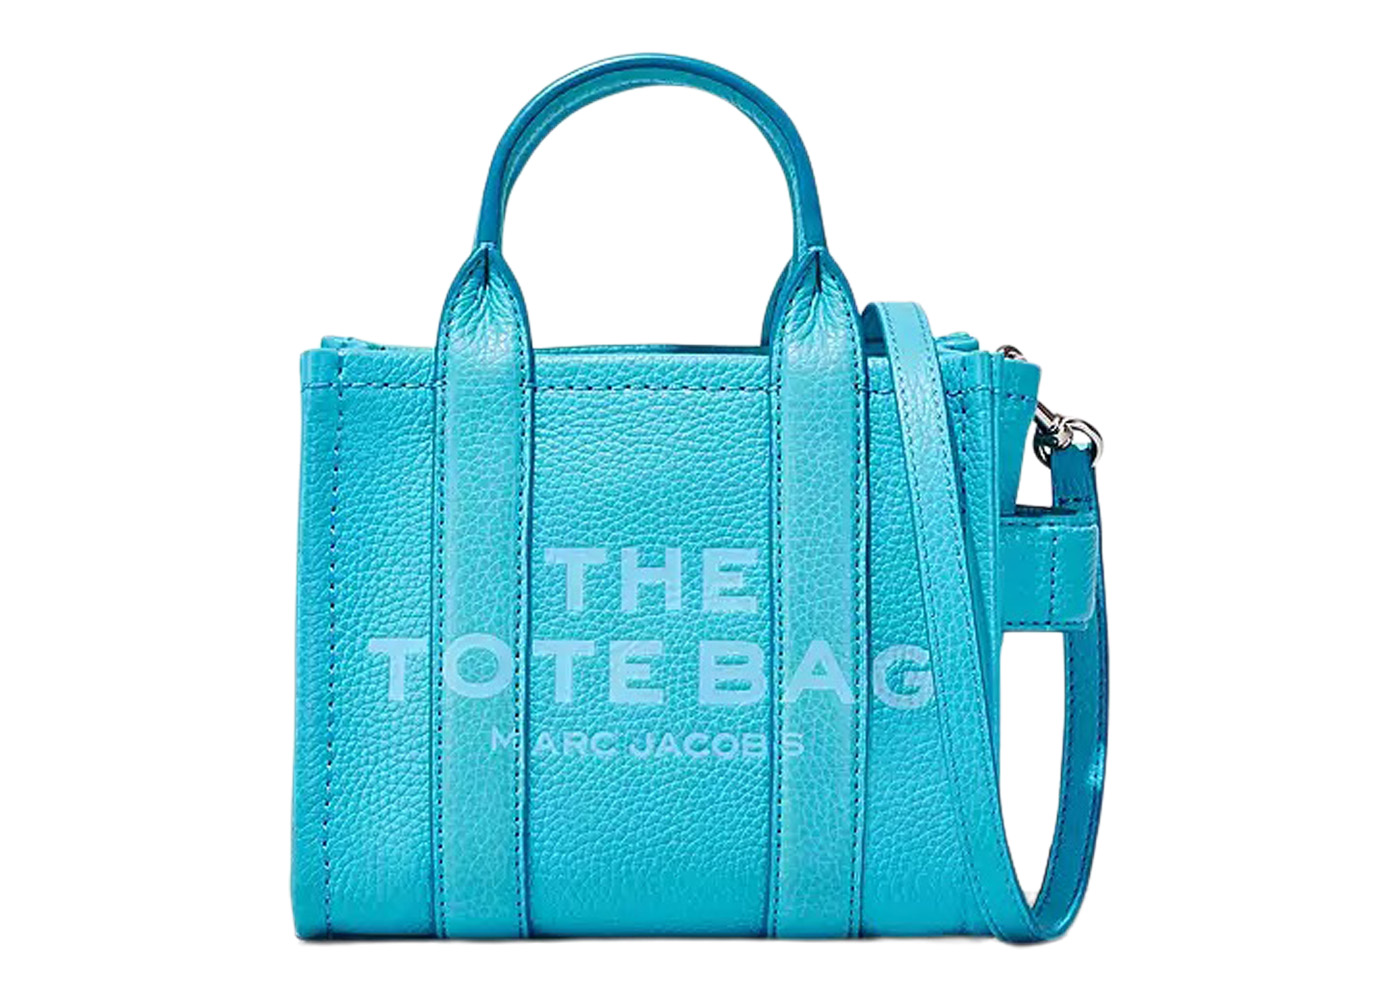 MARC JACOBS THE MICRO TOTE ハンドバッグ